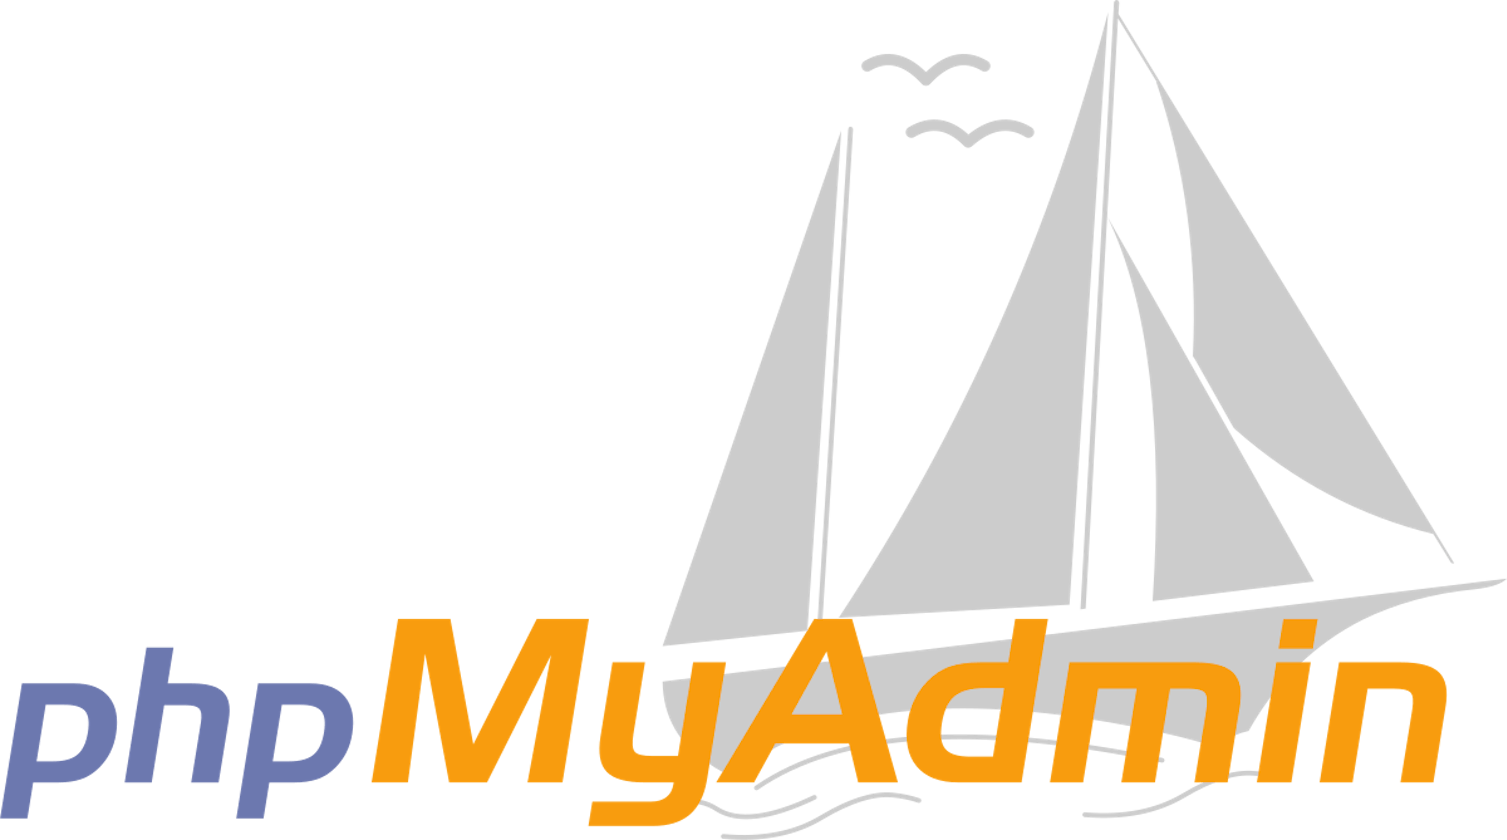 How to create database in PhpMyAdmin?